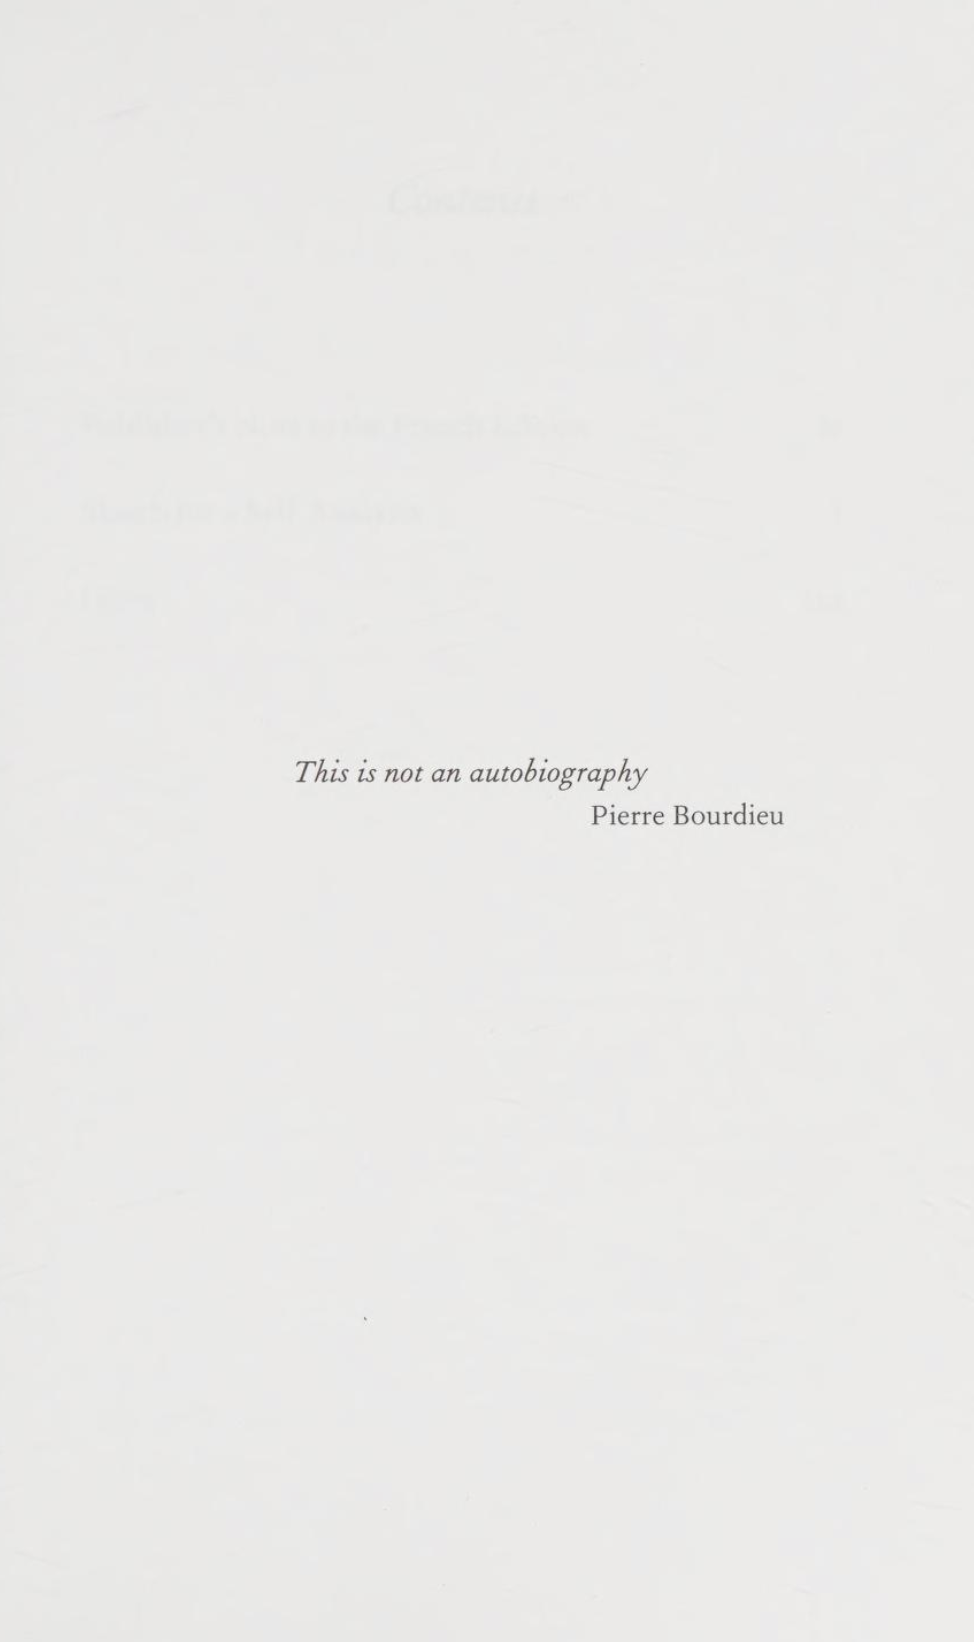 "This is not an autobiography" — Pierre Bourdieu